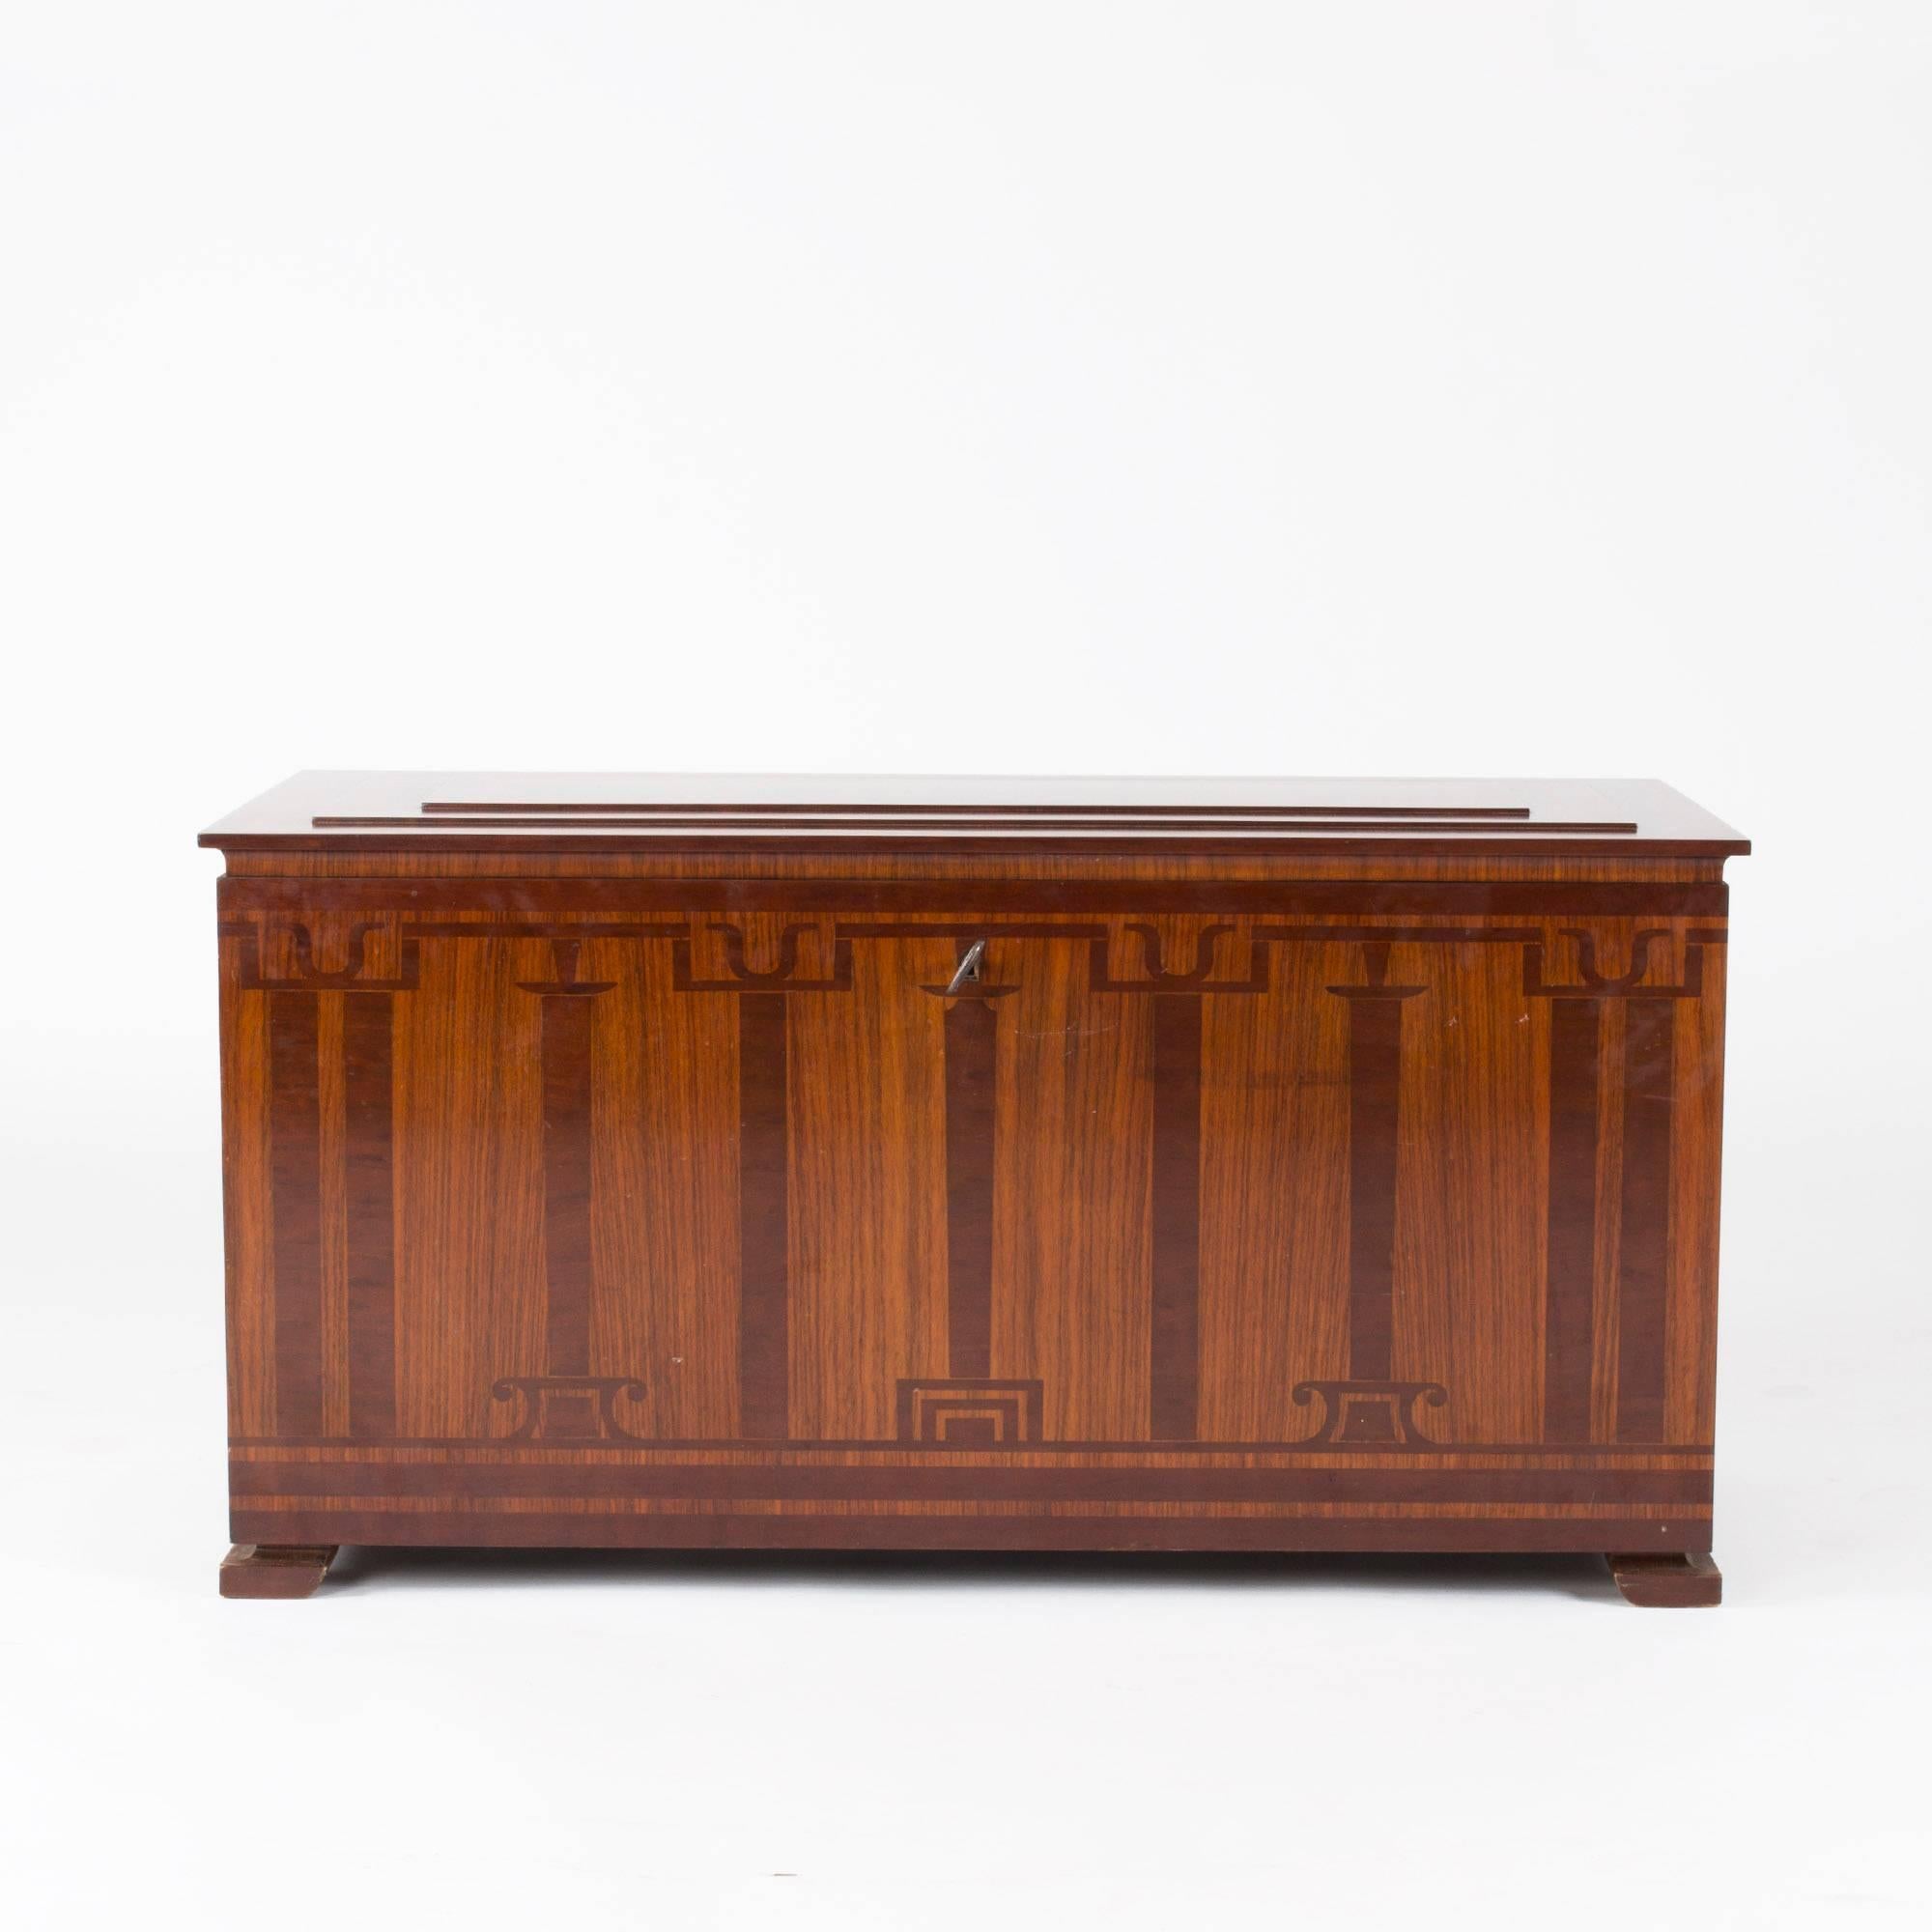 Very elegant chest designed by Carl Malmsten and executed at NK in rosewood and stained birch. Inlays in a pattern of Art Deco style columns. The lid has a slight build up design with the wood grain laid in a striking striped pattern. Black